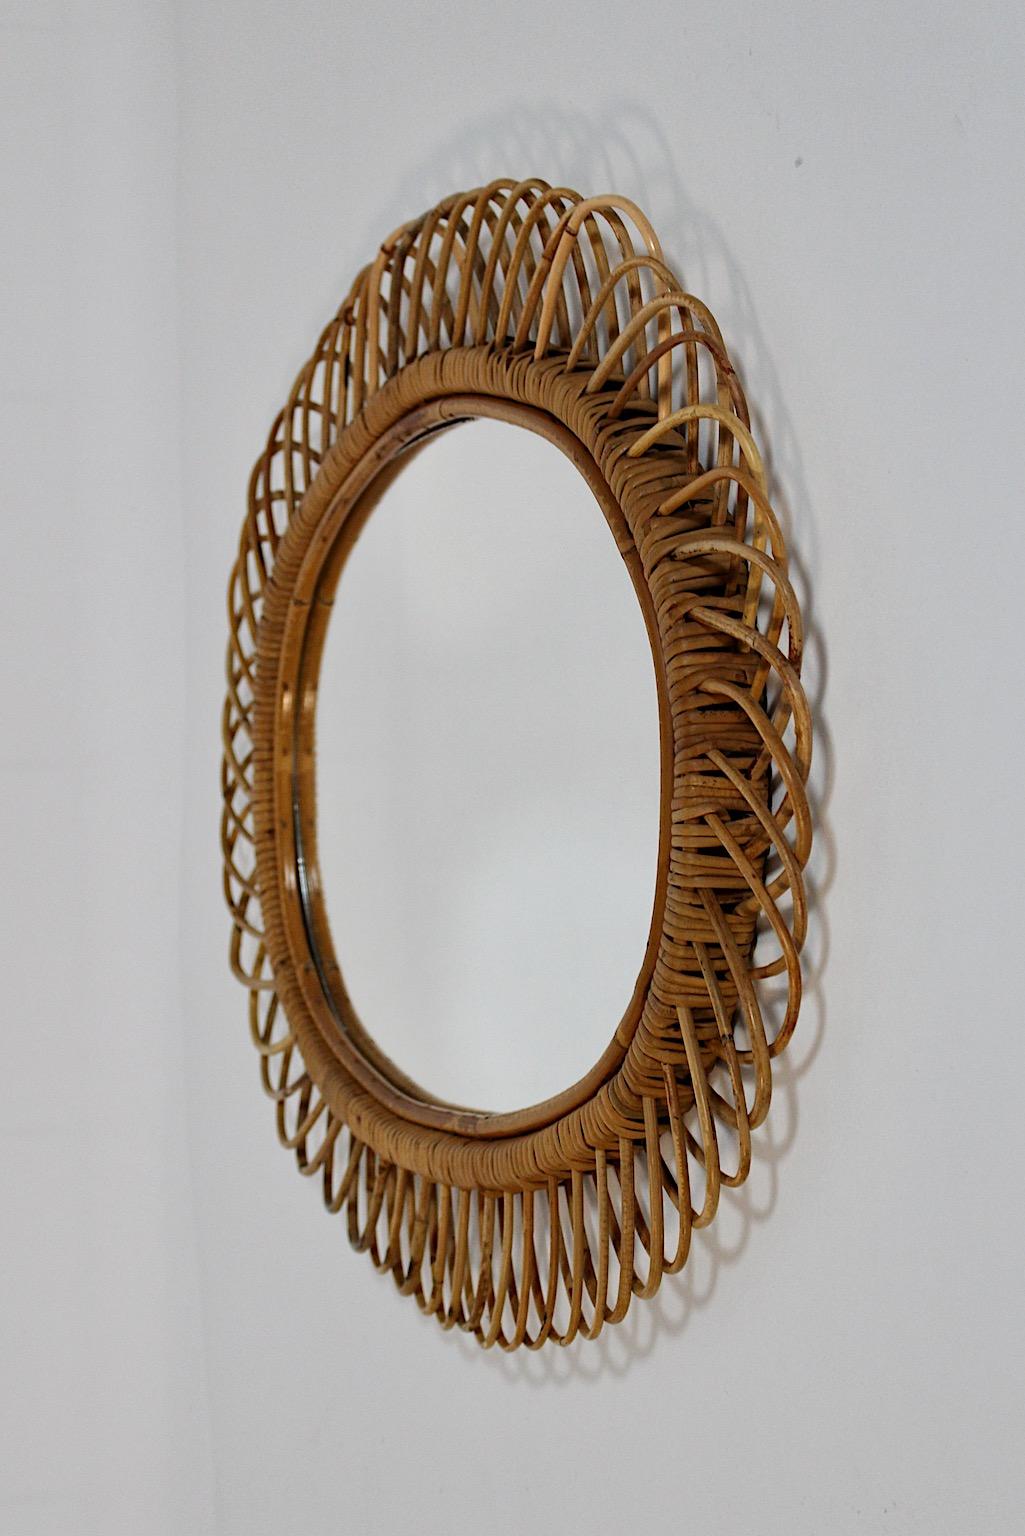 Mid-Century Modern Vintage organic sunburst mirror or wall mirror
from rattan and mirror glass, 1960s Italy.
While the large Size from this sunburst mirror allows to hang up in
an entryway or about a fireplace the charming sunburst- like a